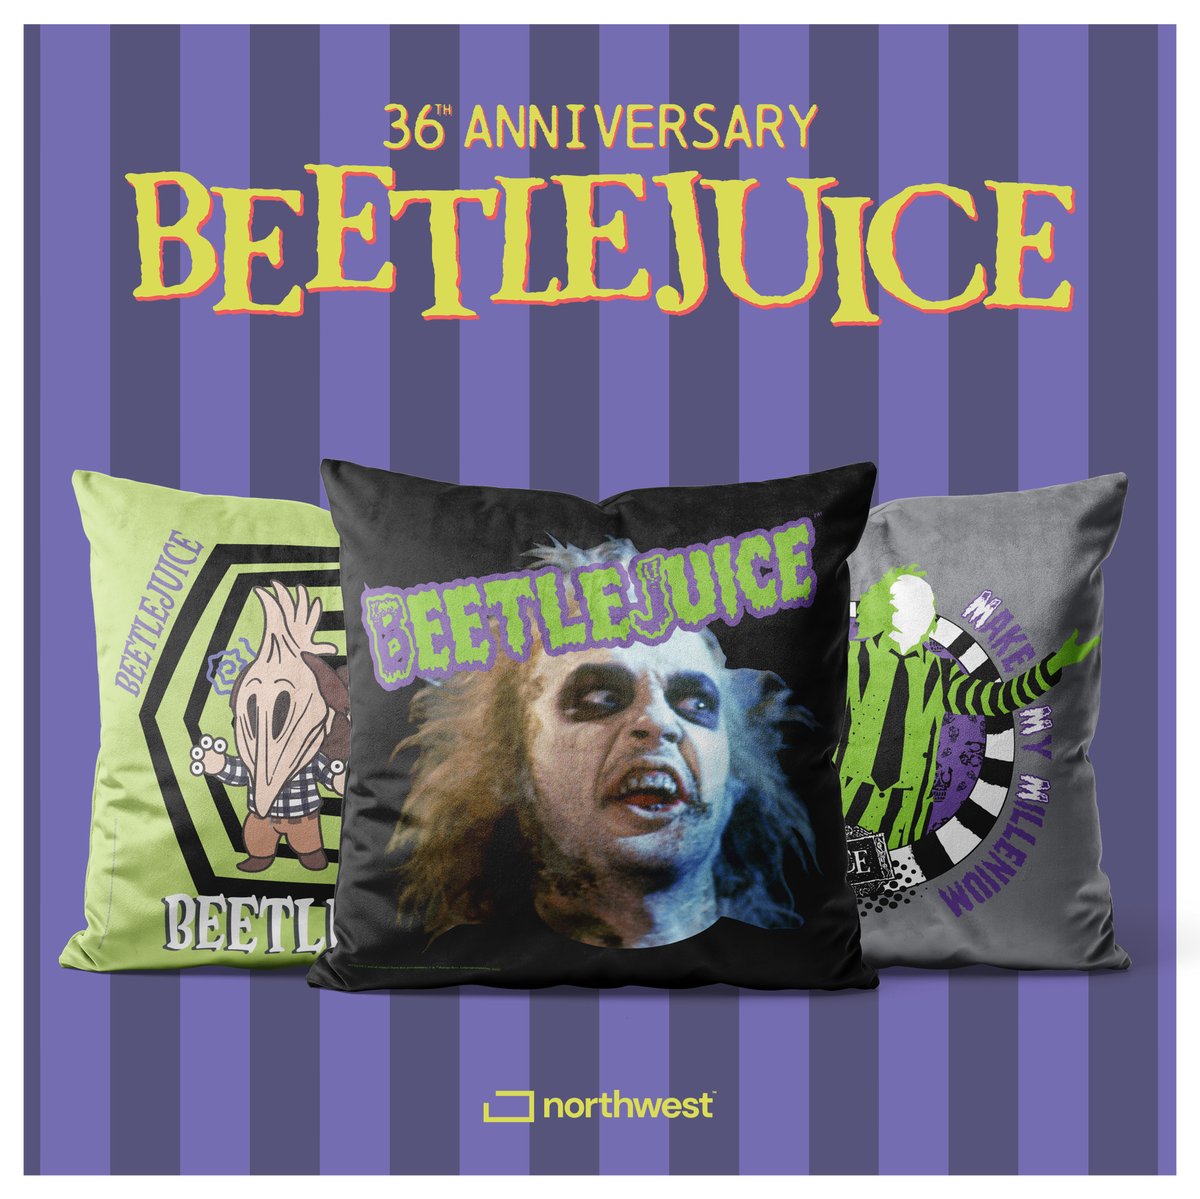 Beetlejuice, Beetlejuice, Beet.... well, you get the point. 36 years ago today, Beetlejuice was released in theaters! 🕷️👻 Shop our collection of Beetlejuice throw pillows and blankets: bit.ly/3S85338 #Beetlejuice | #WarnerBros | #Northwest